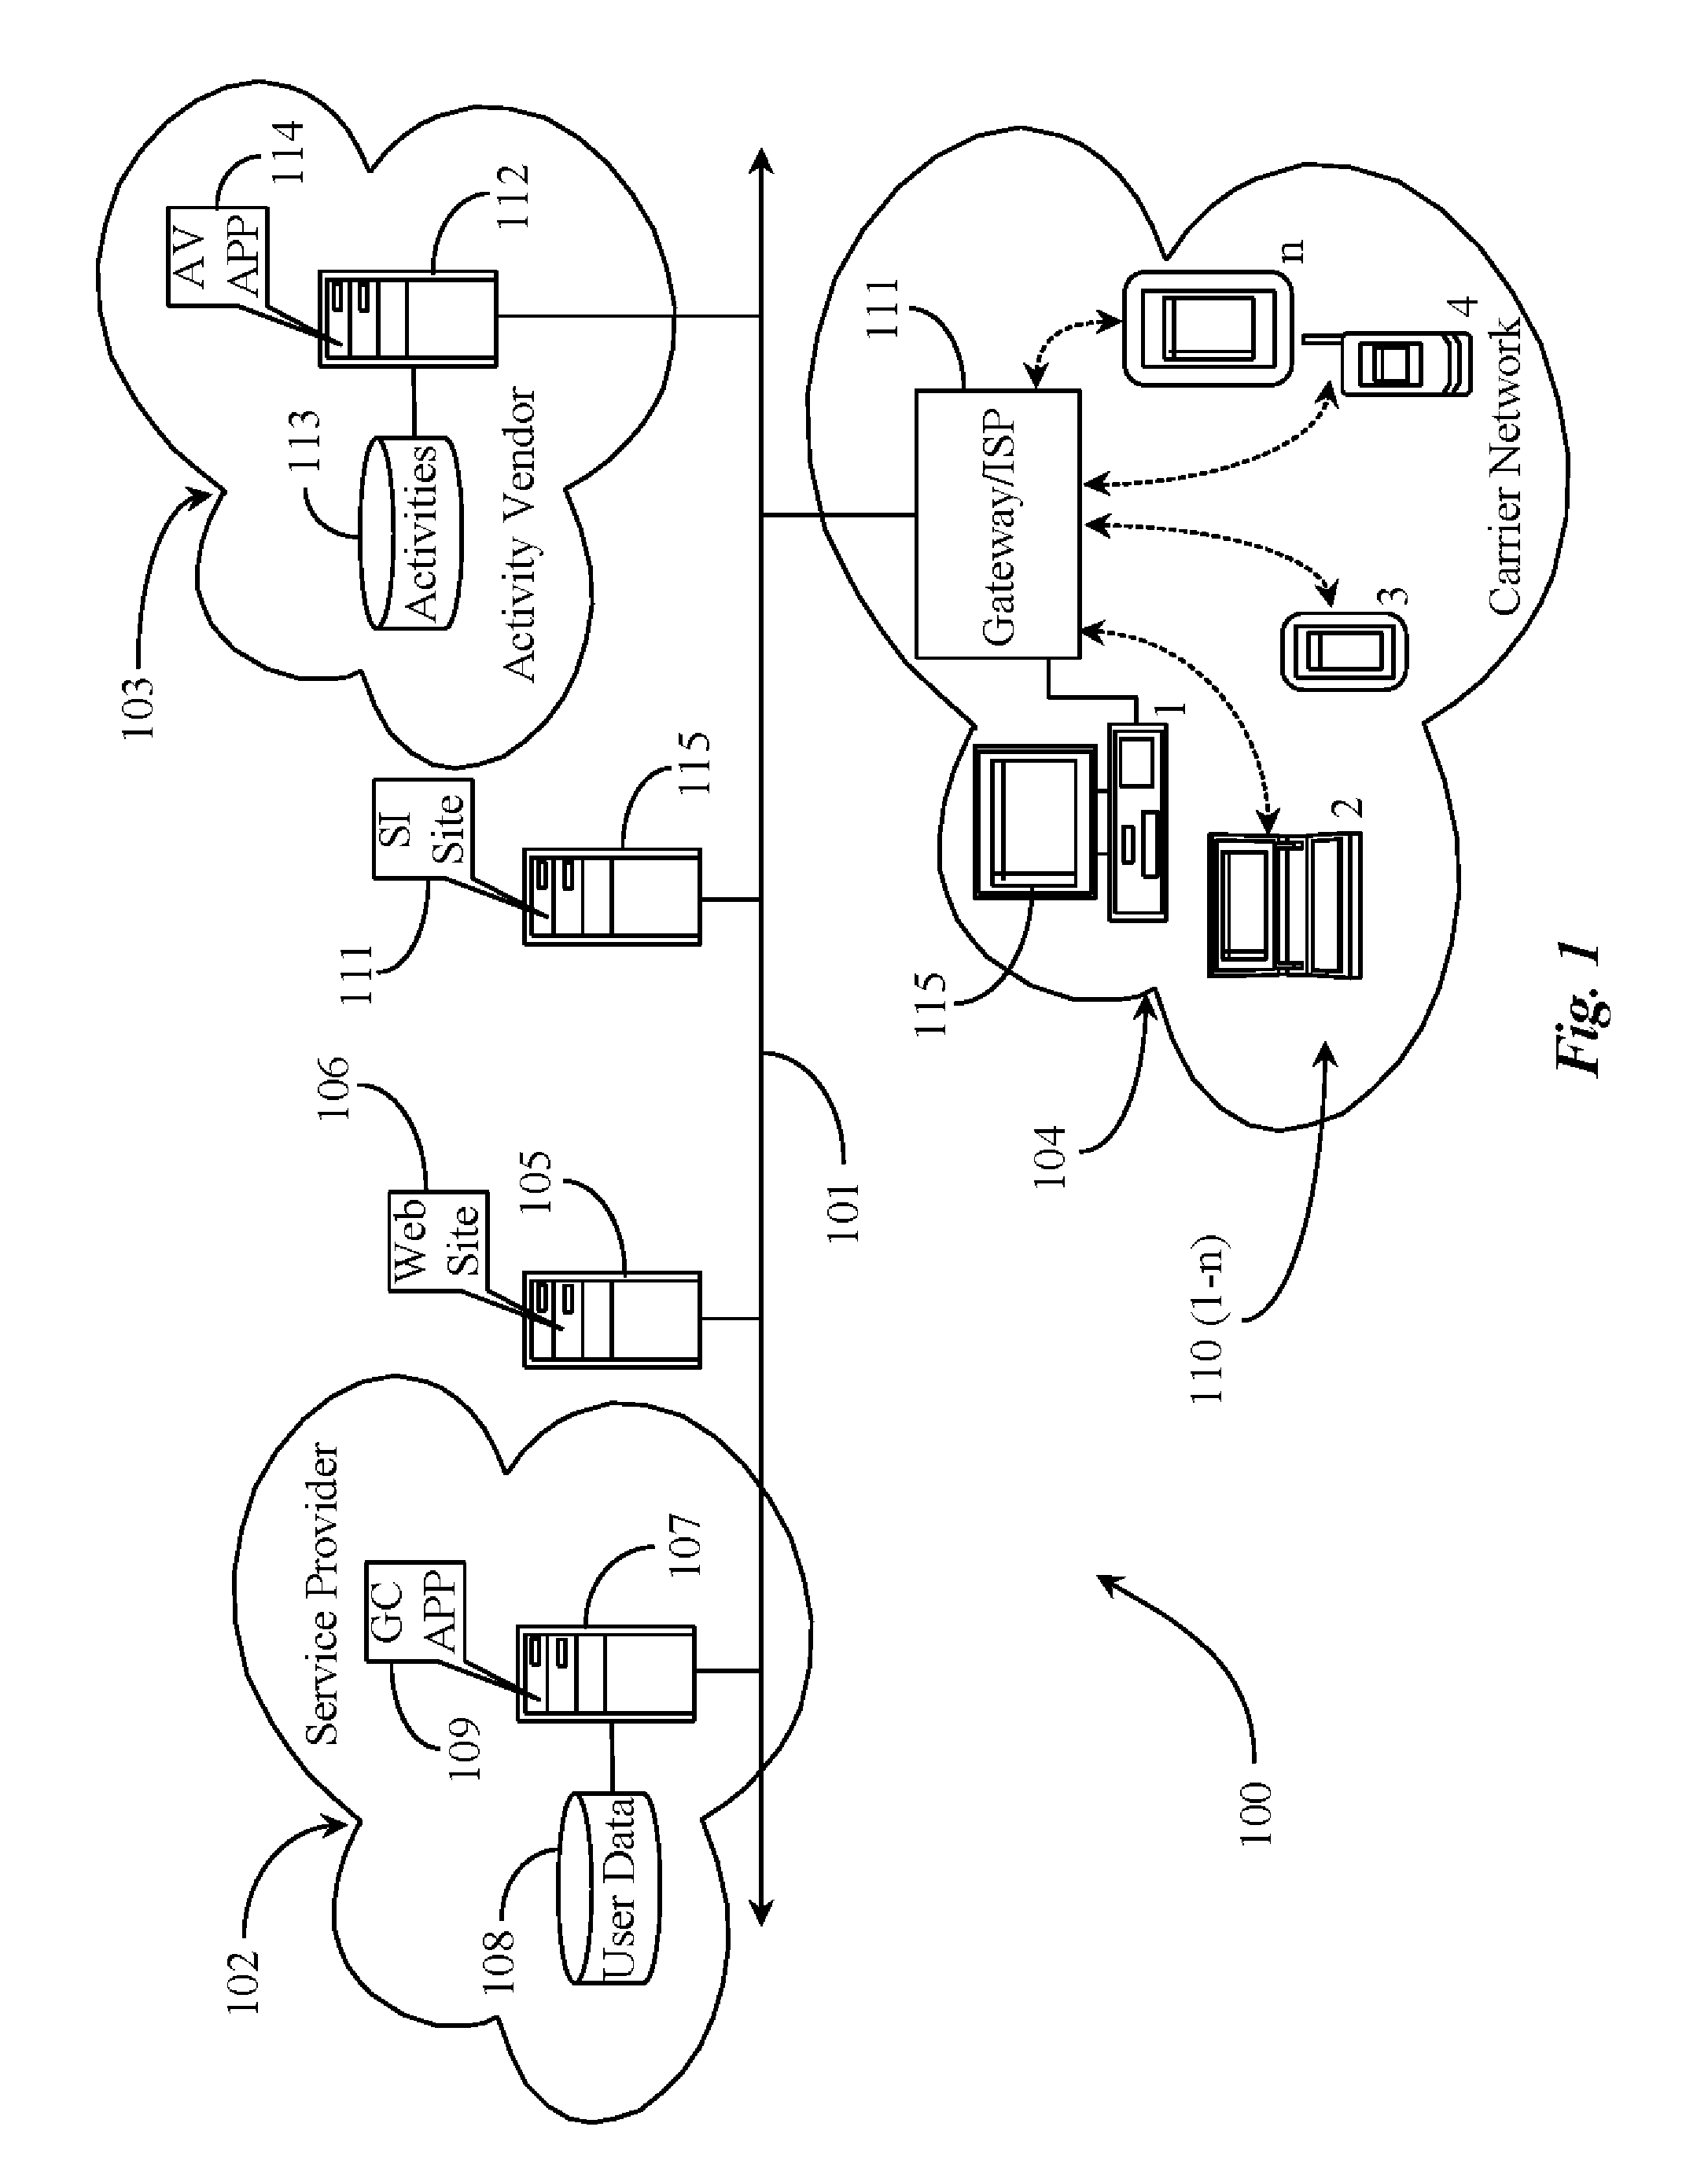 Systems and methods for automatically adjusting pricing for group activities over a data network